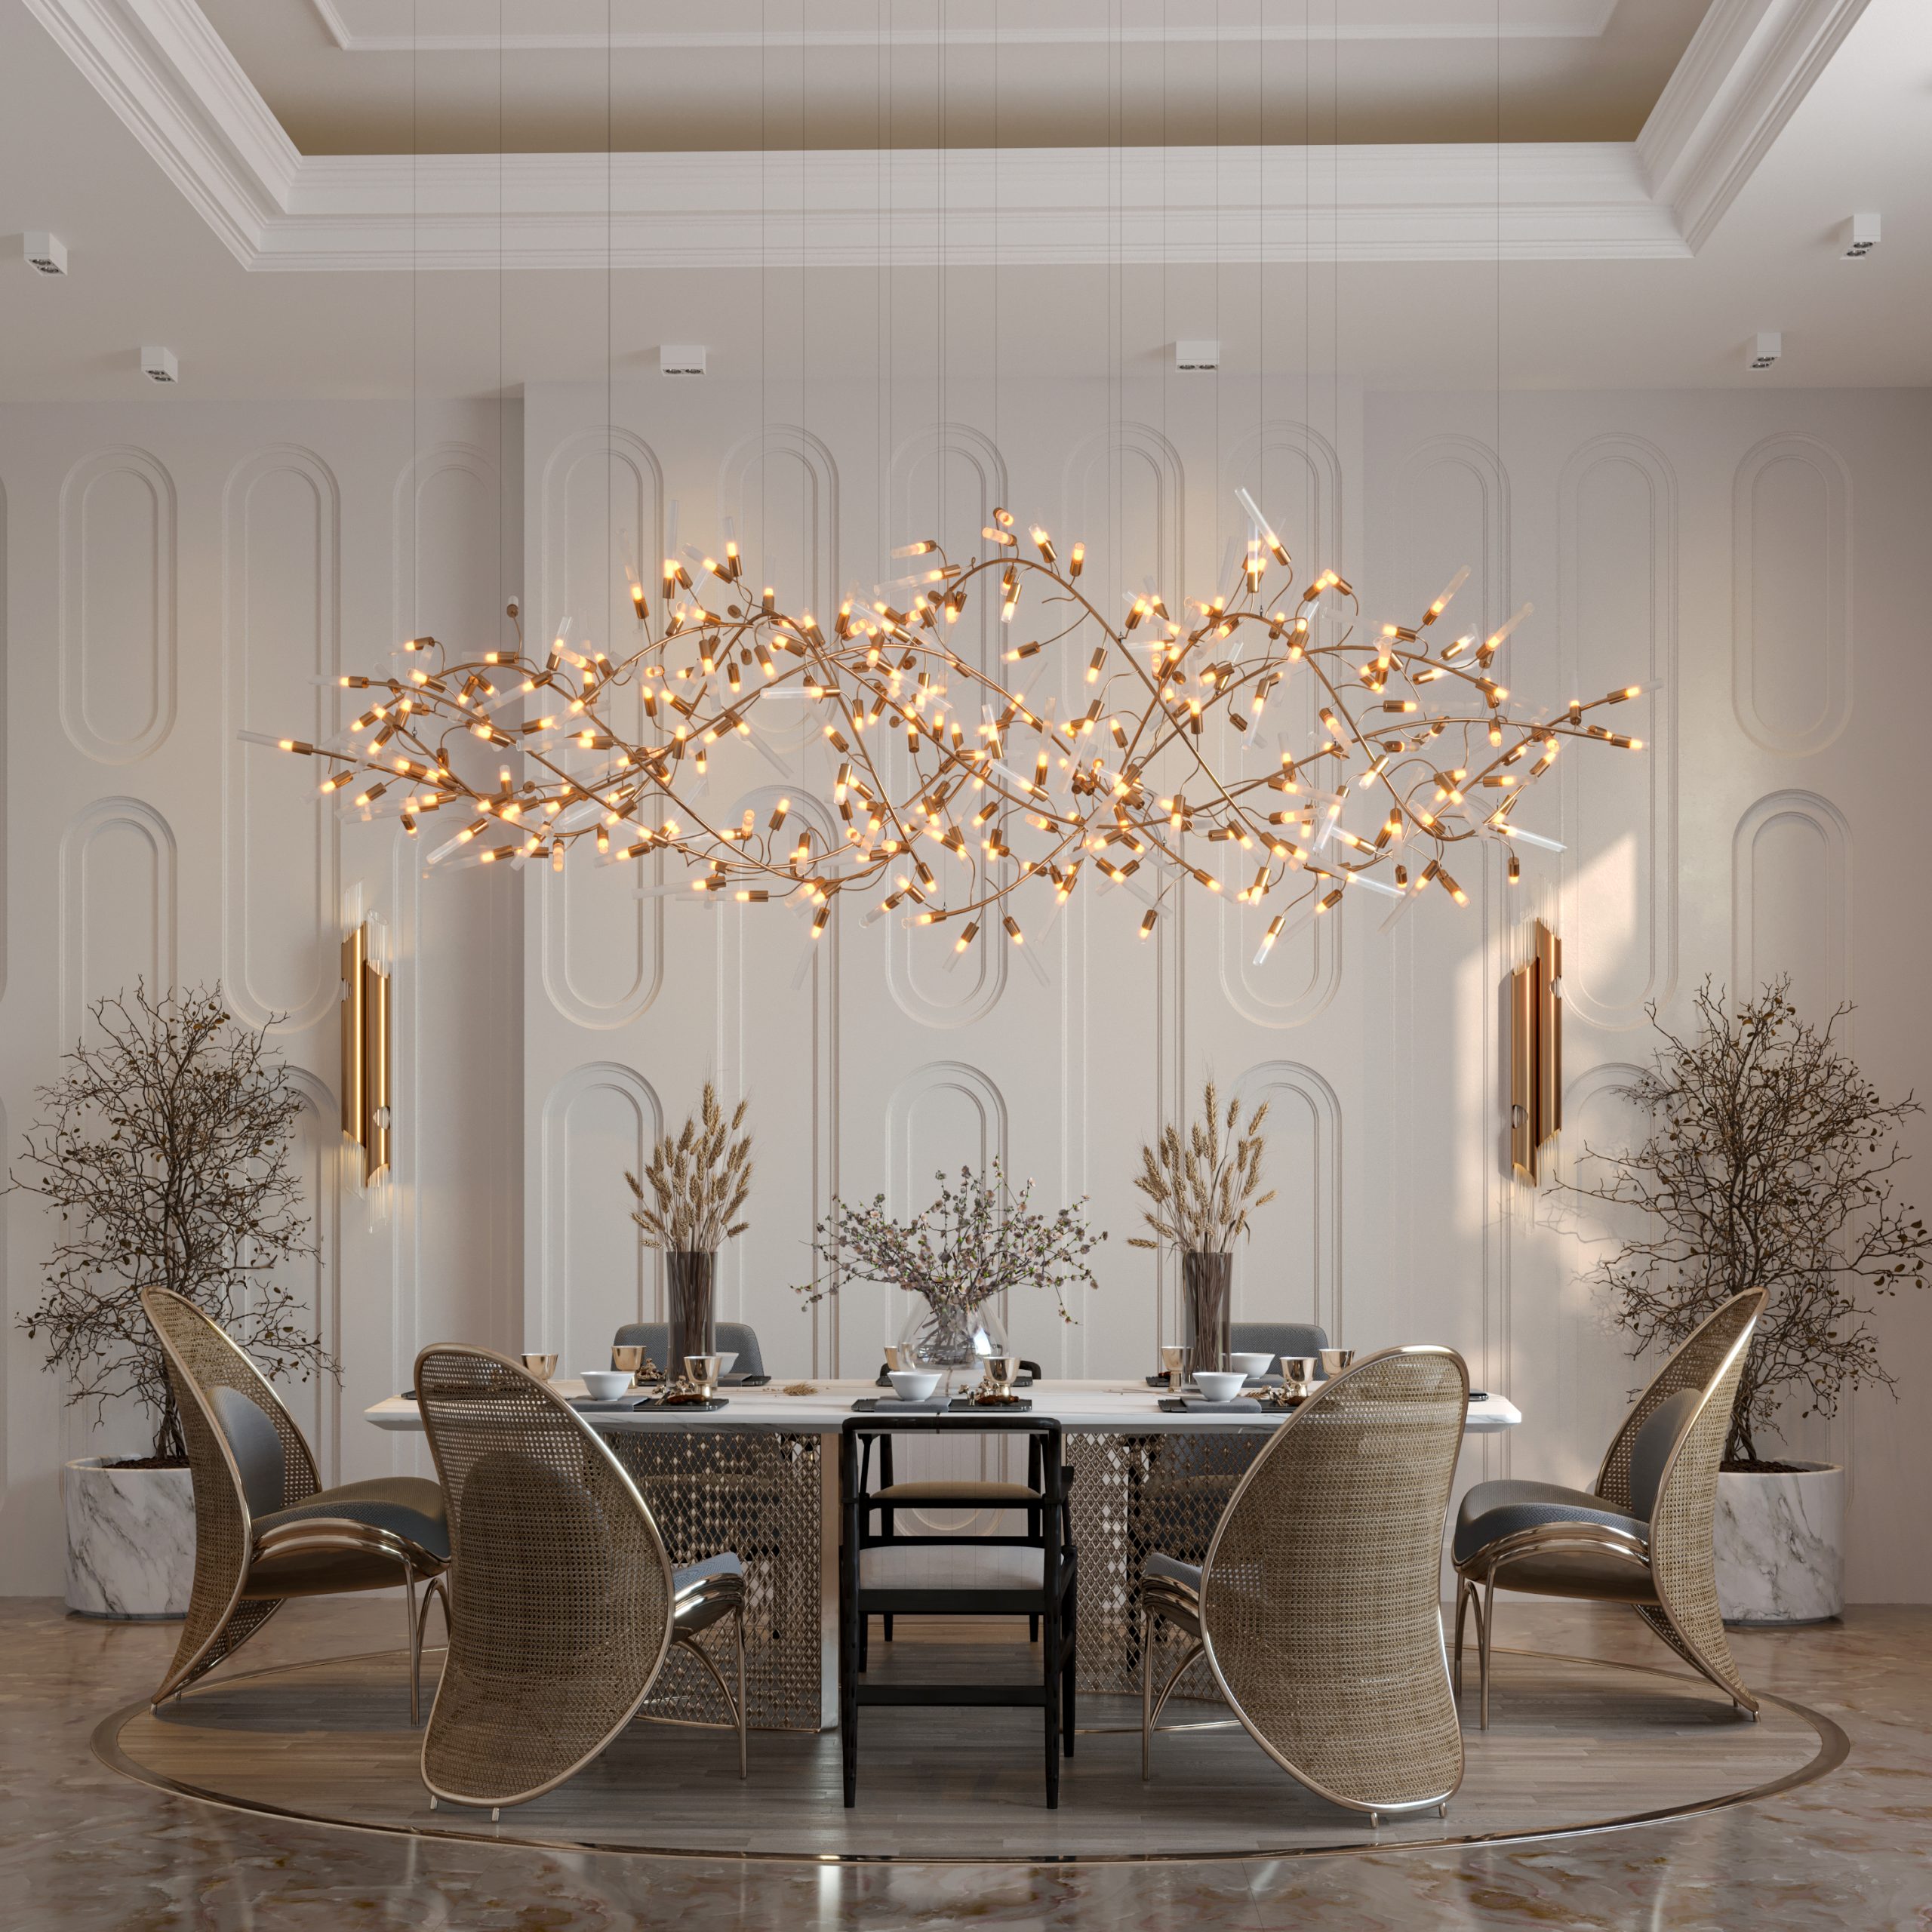 UNIQUE ELEMENTS OF FURNITURE COMPANIES - DINIING ROOM - CHANDIELER - CHAIRS - TABLE - WALL LIGHT 